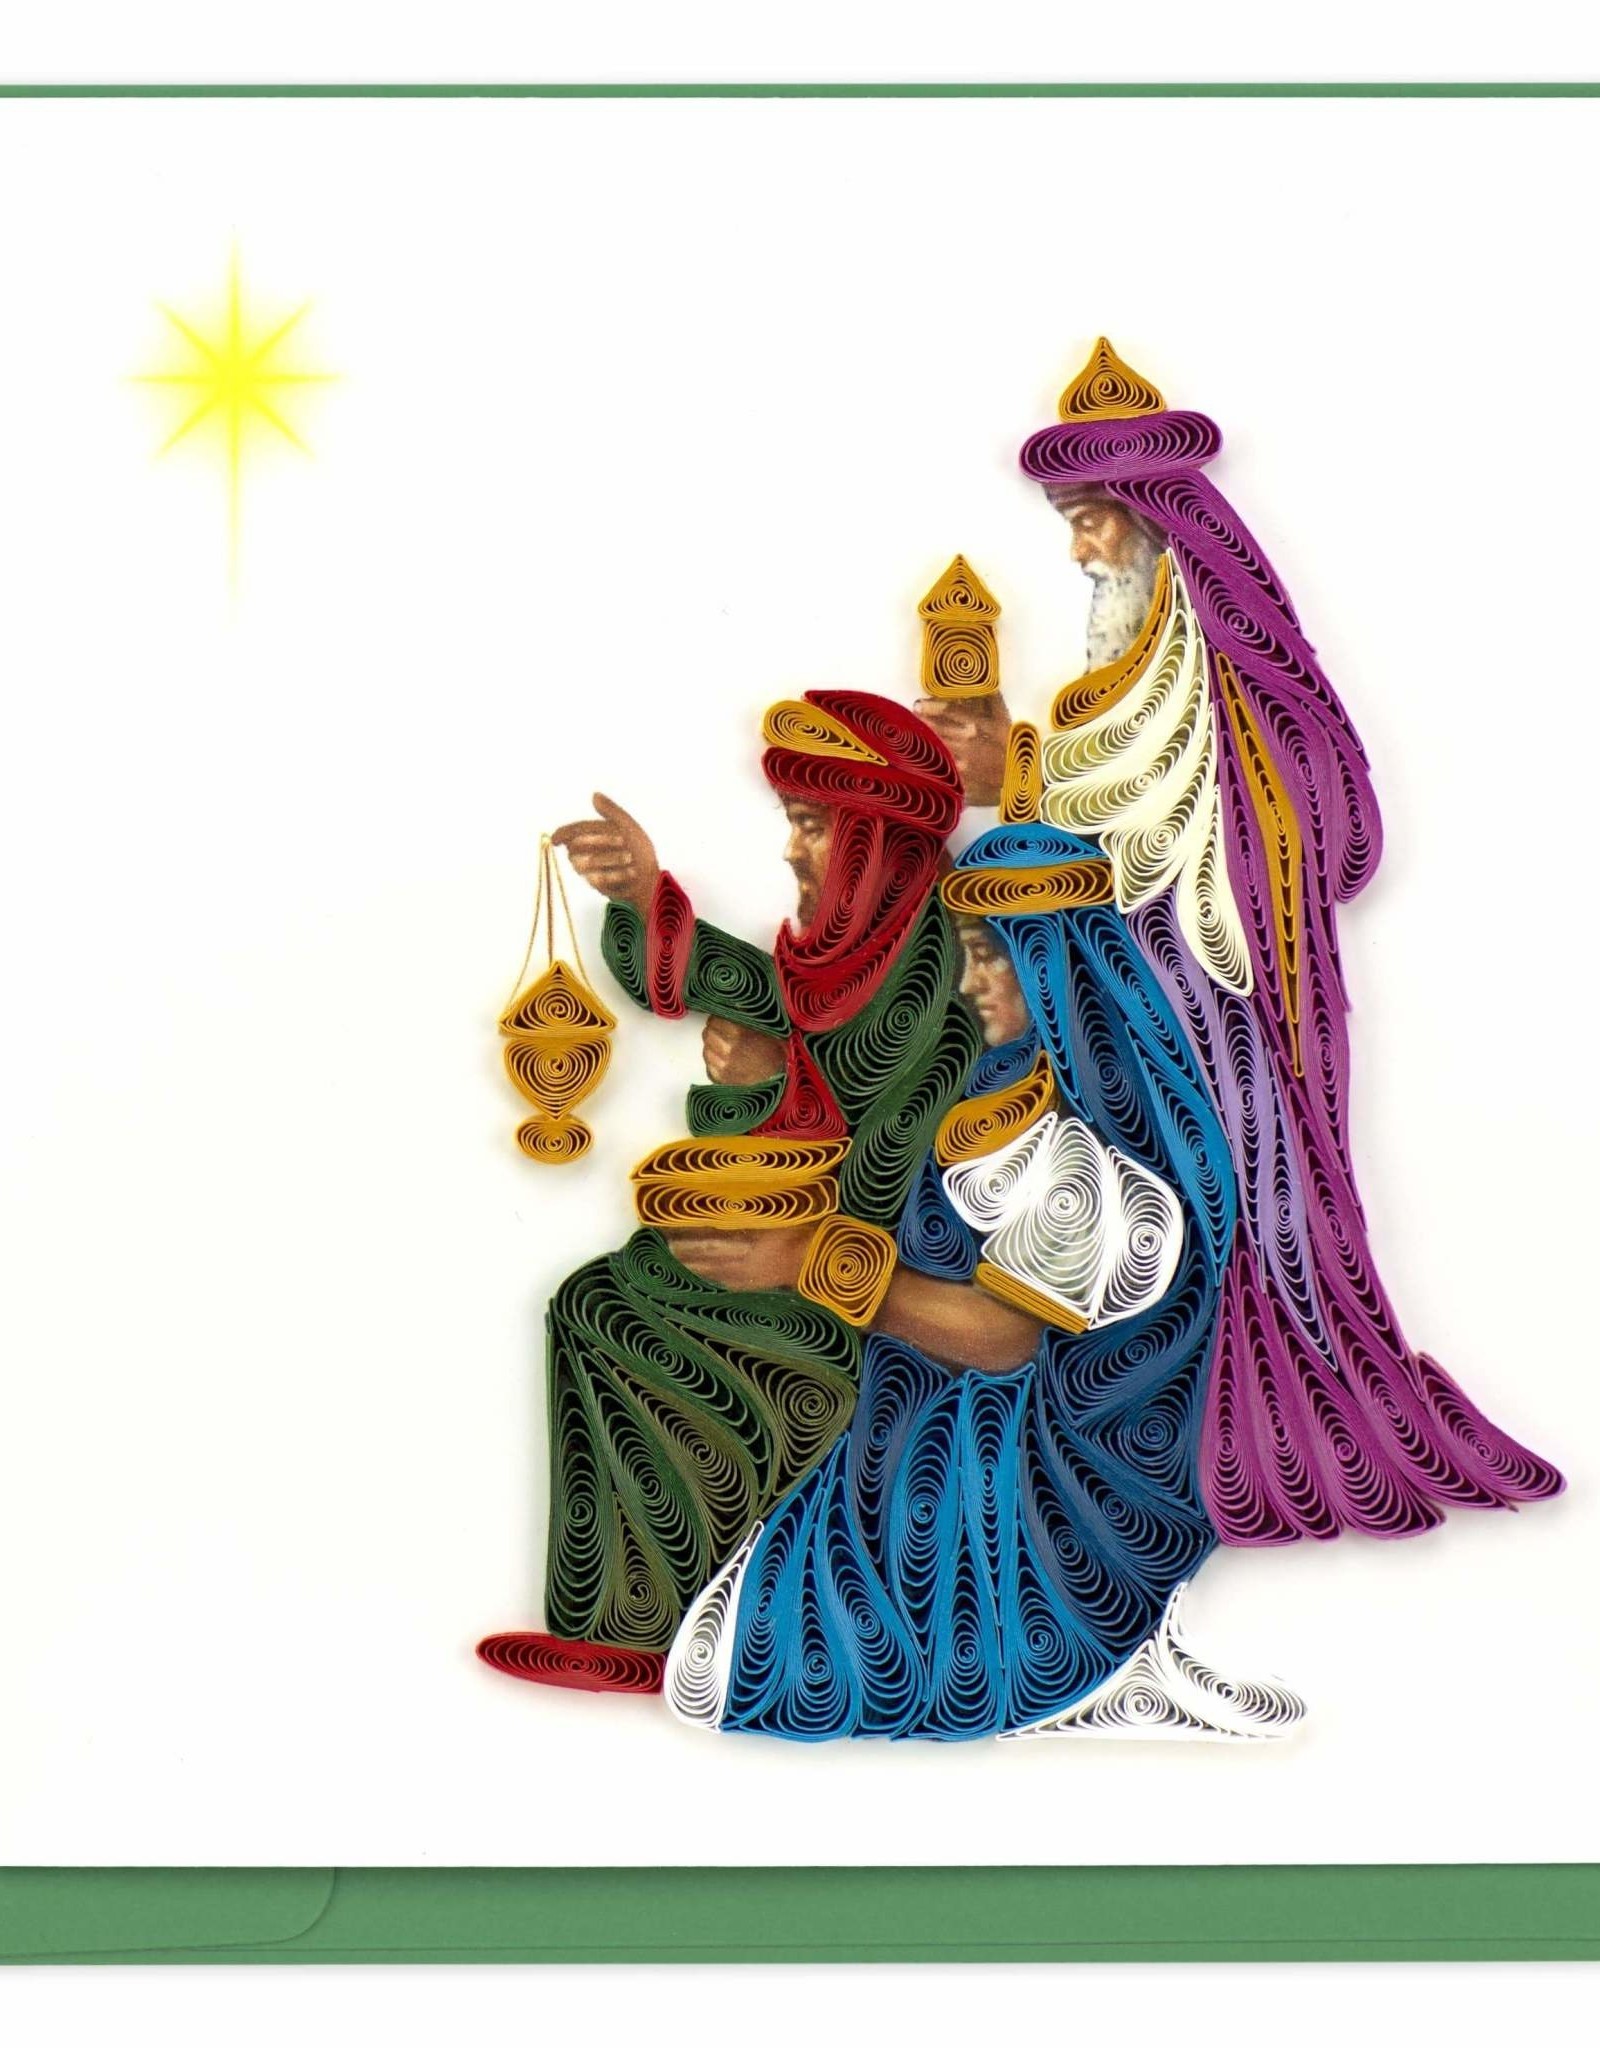 Quilling Card Quilled Three Wise Men Christmas Card